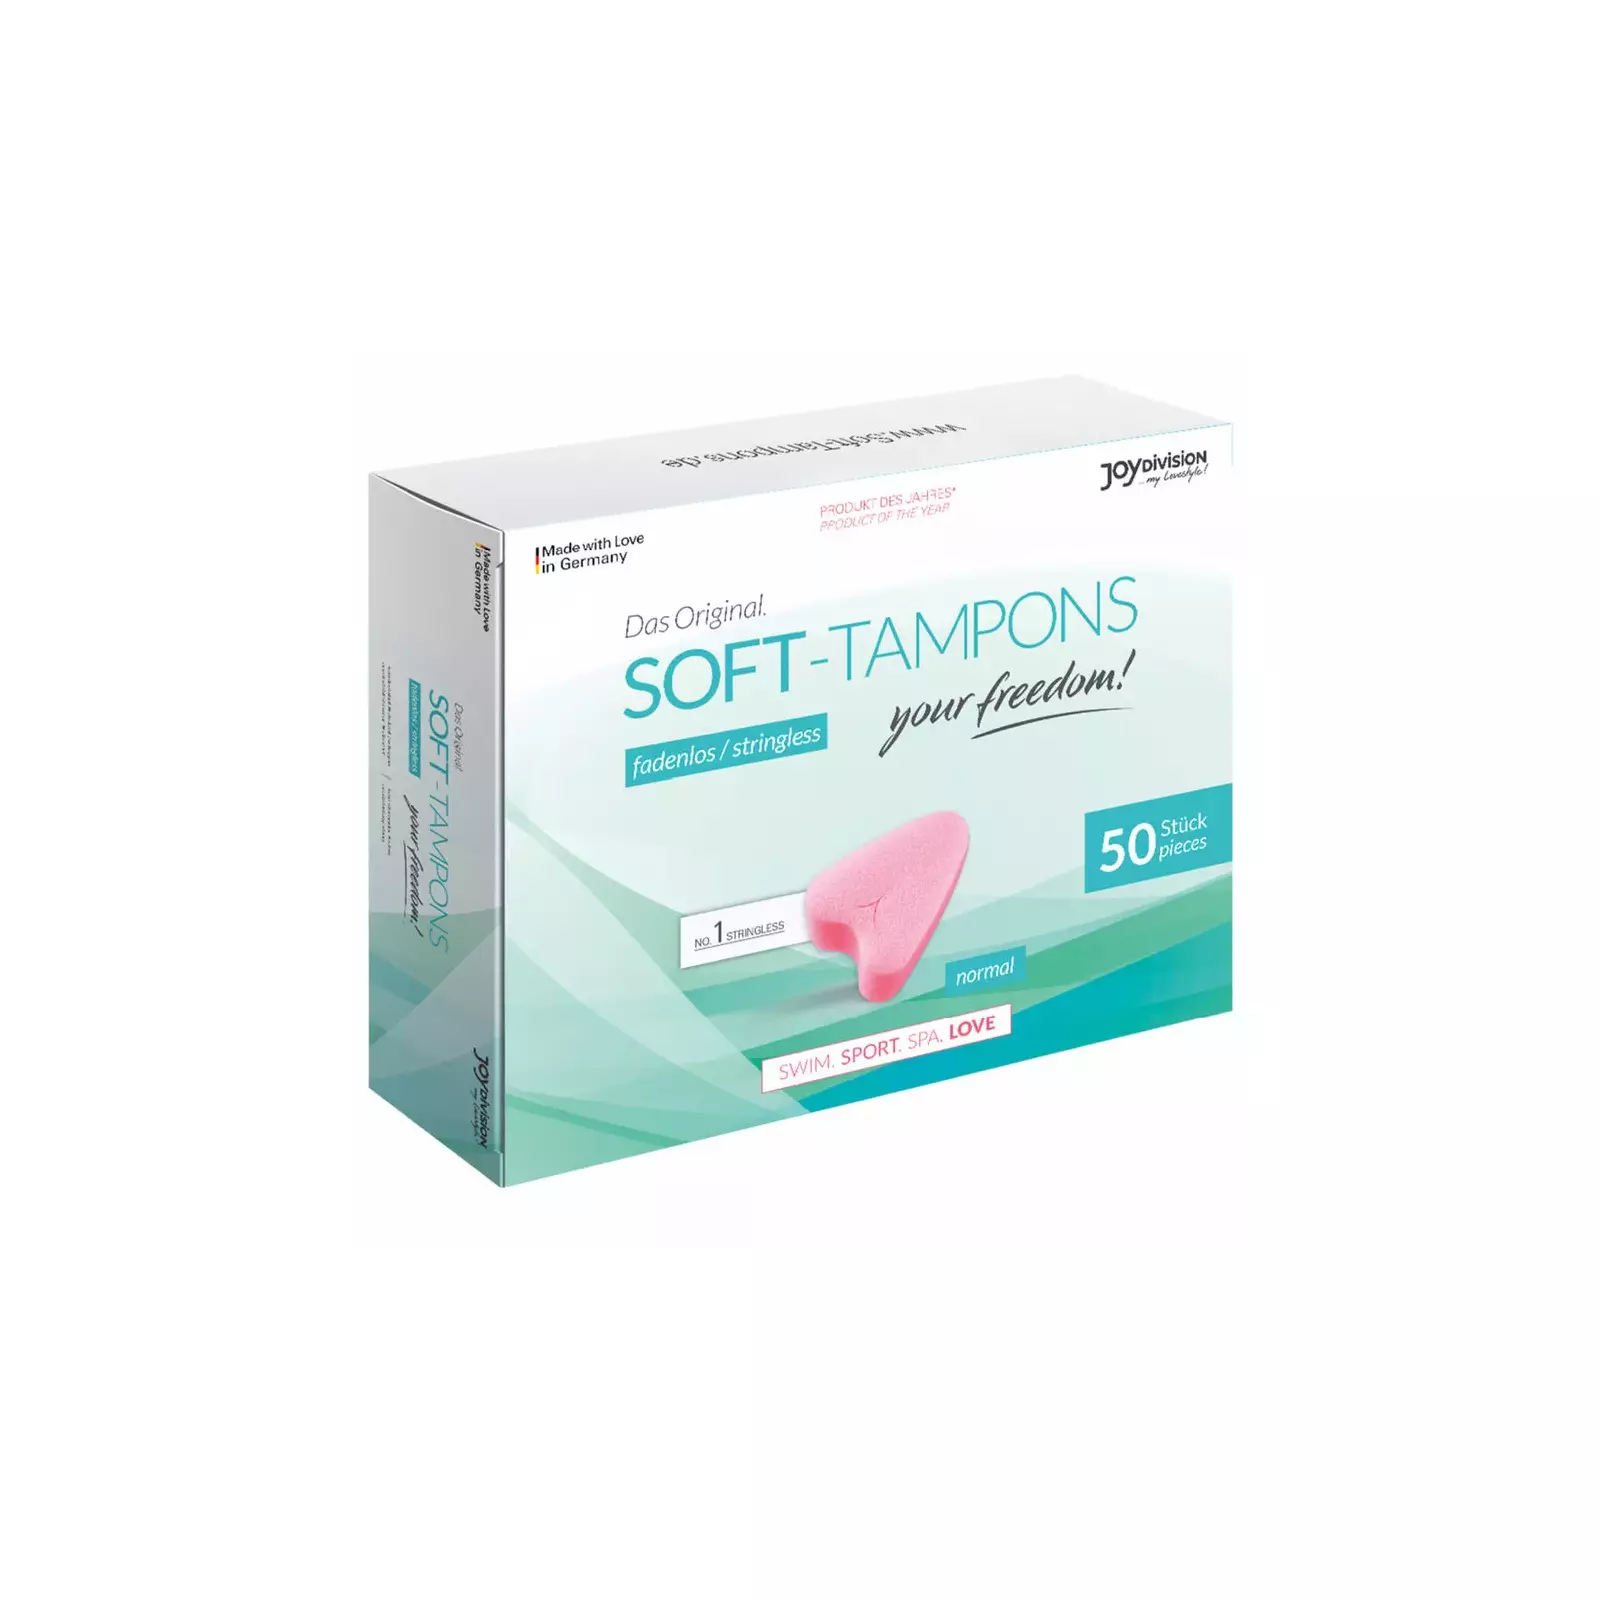 SOFT-TAMPONS D-207287 Photo 1